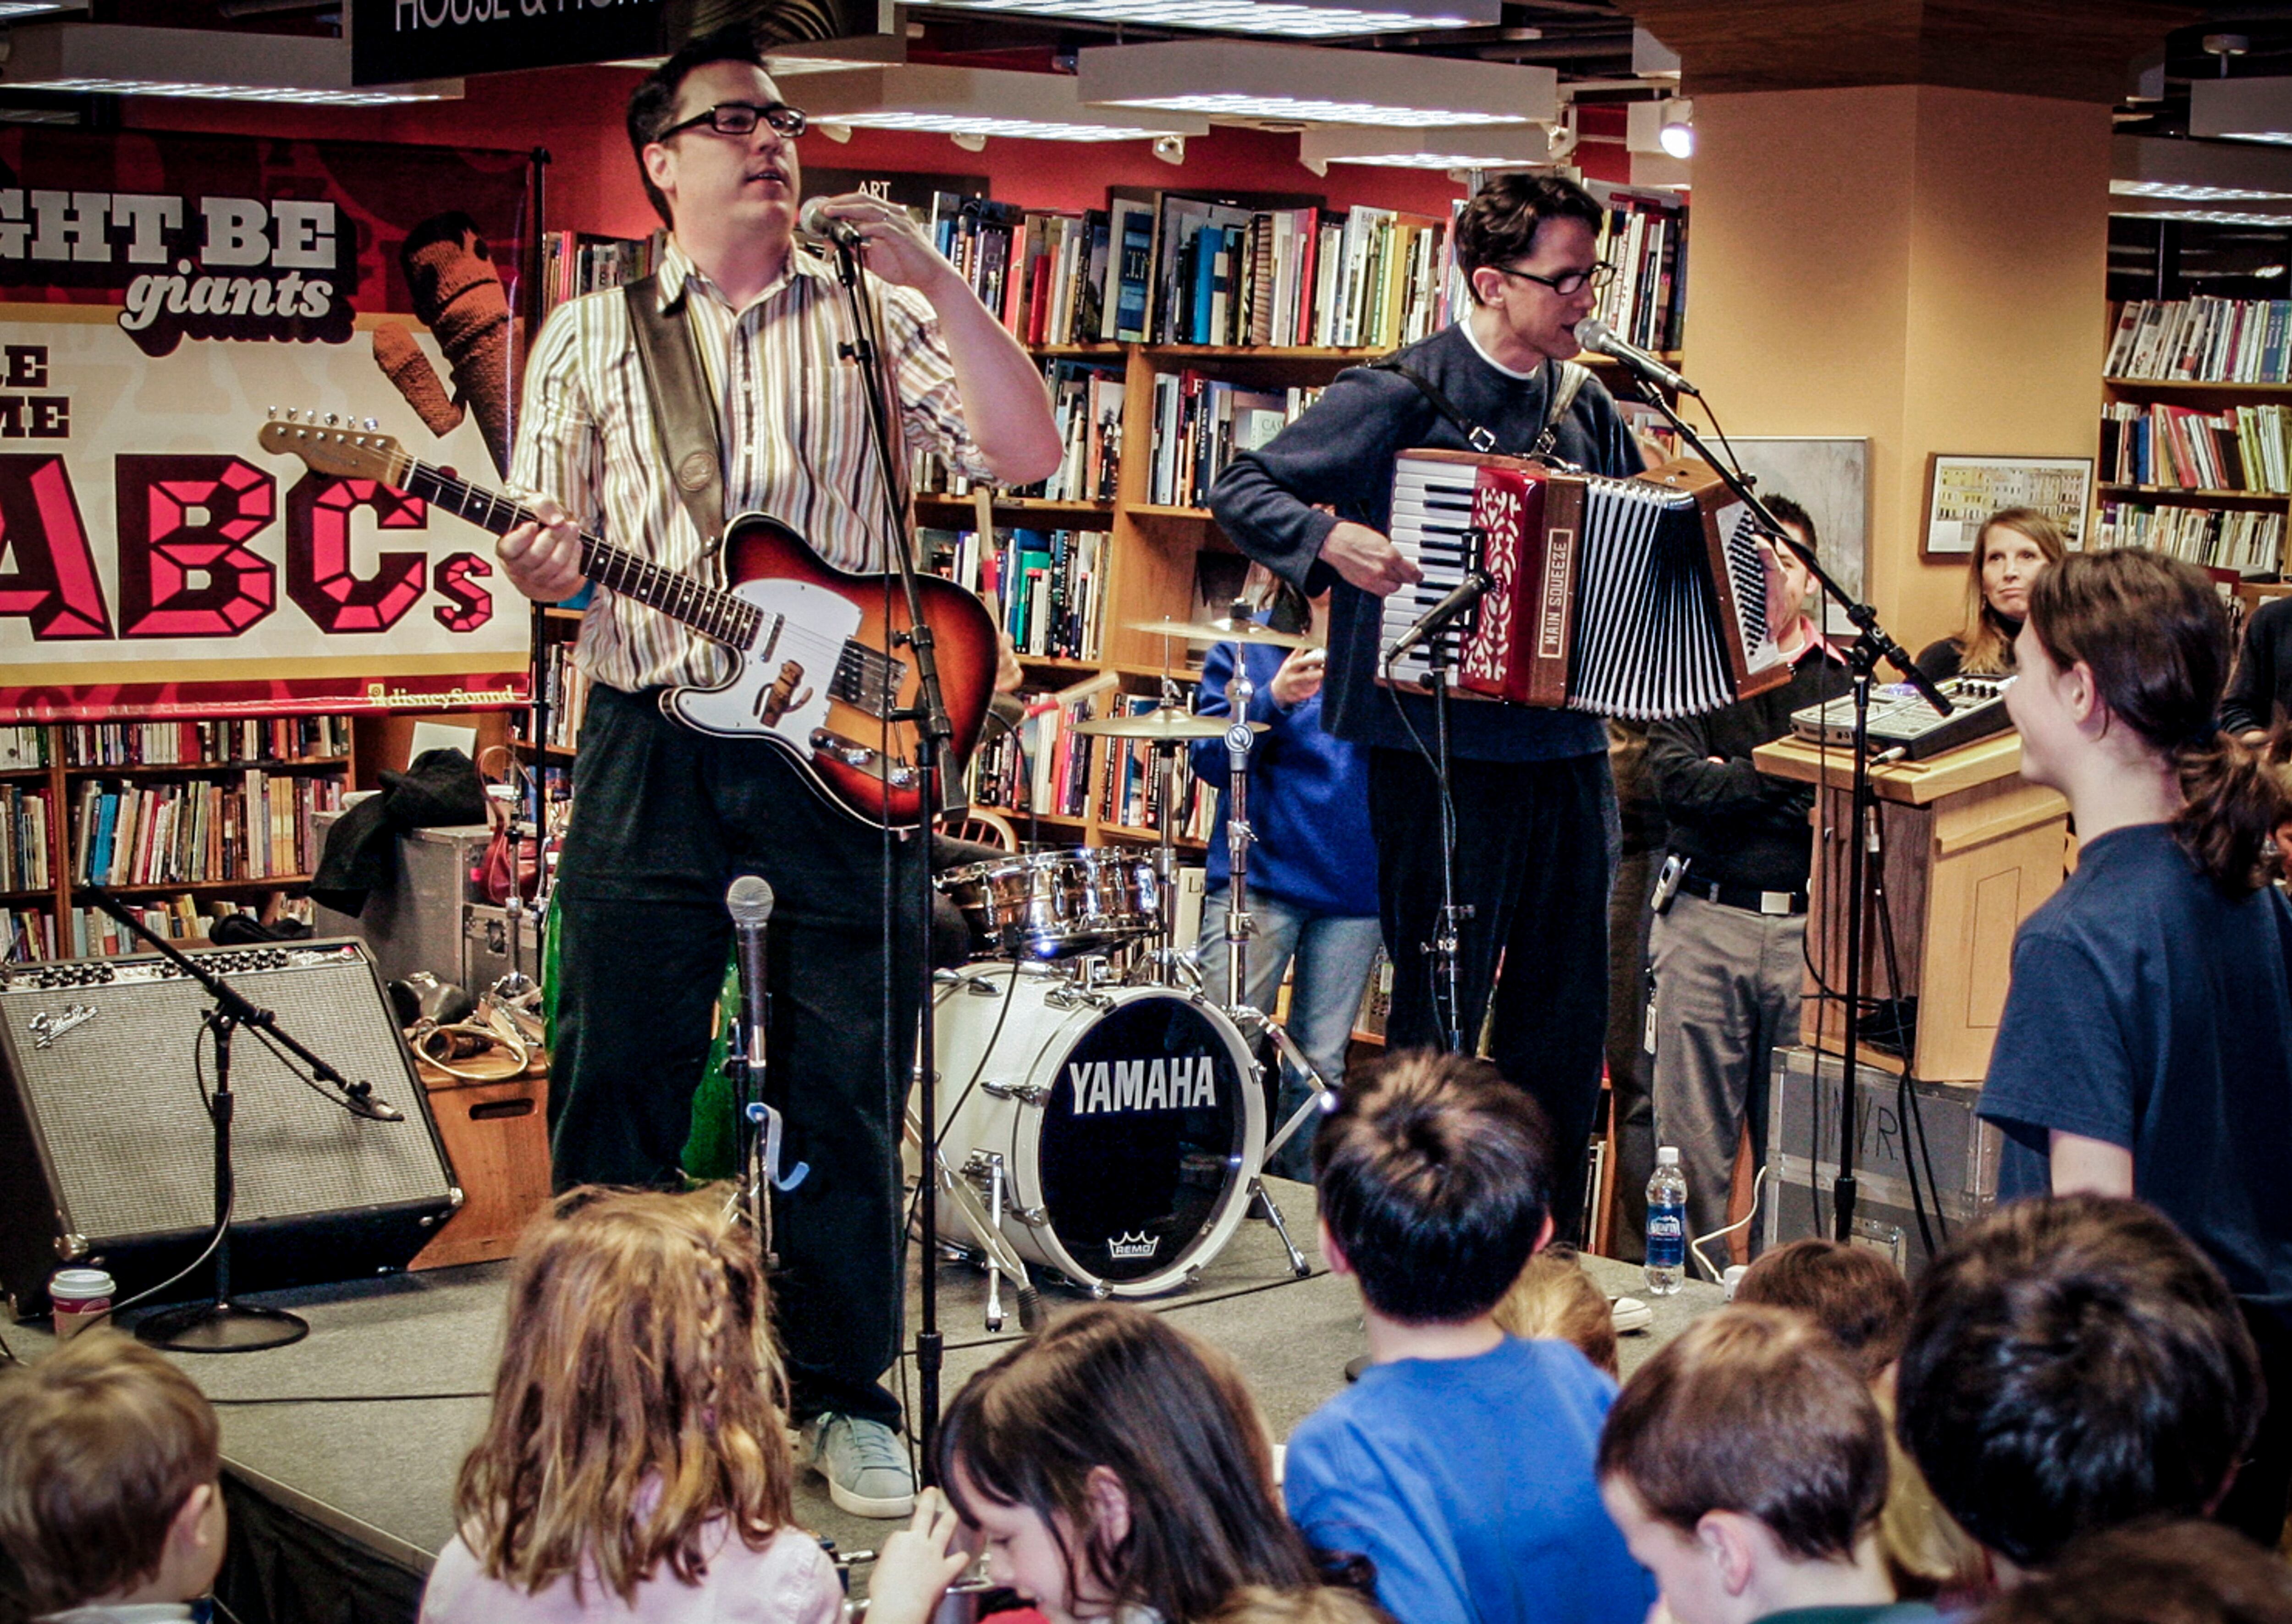 They Might Be Giants singer-guitarist injured in NYC crash